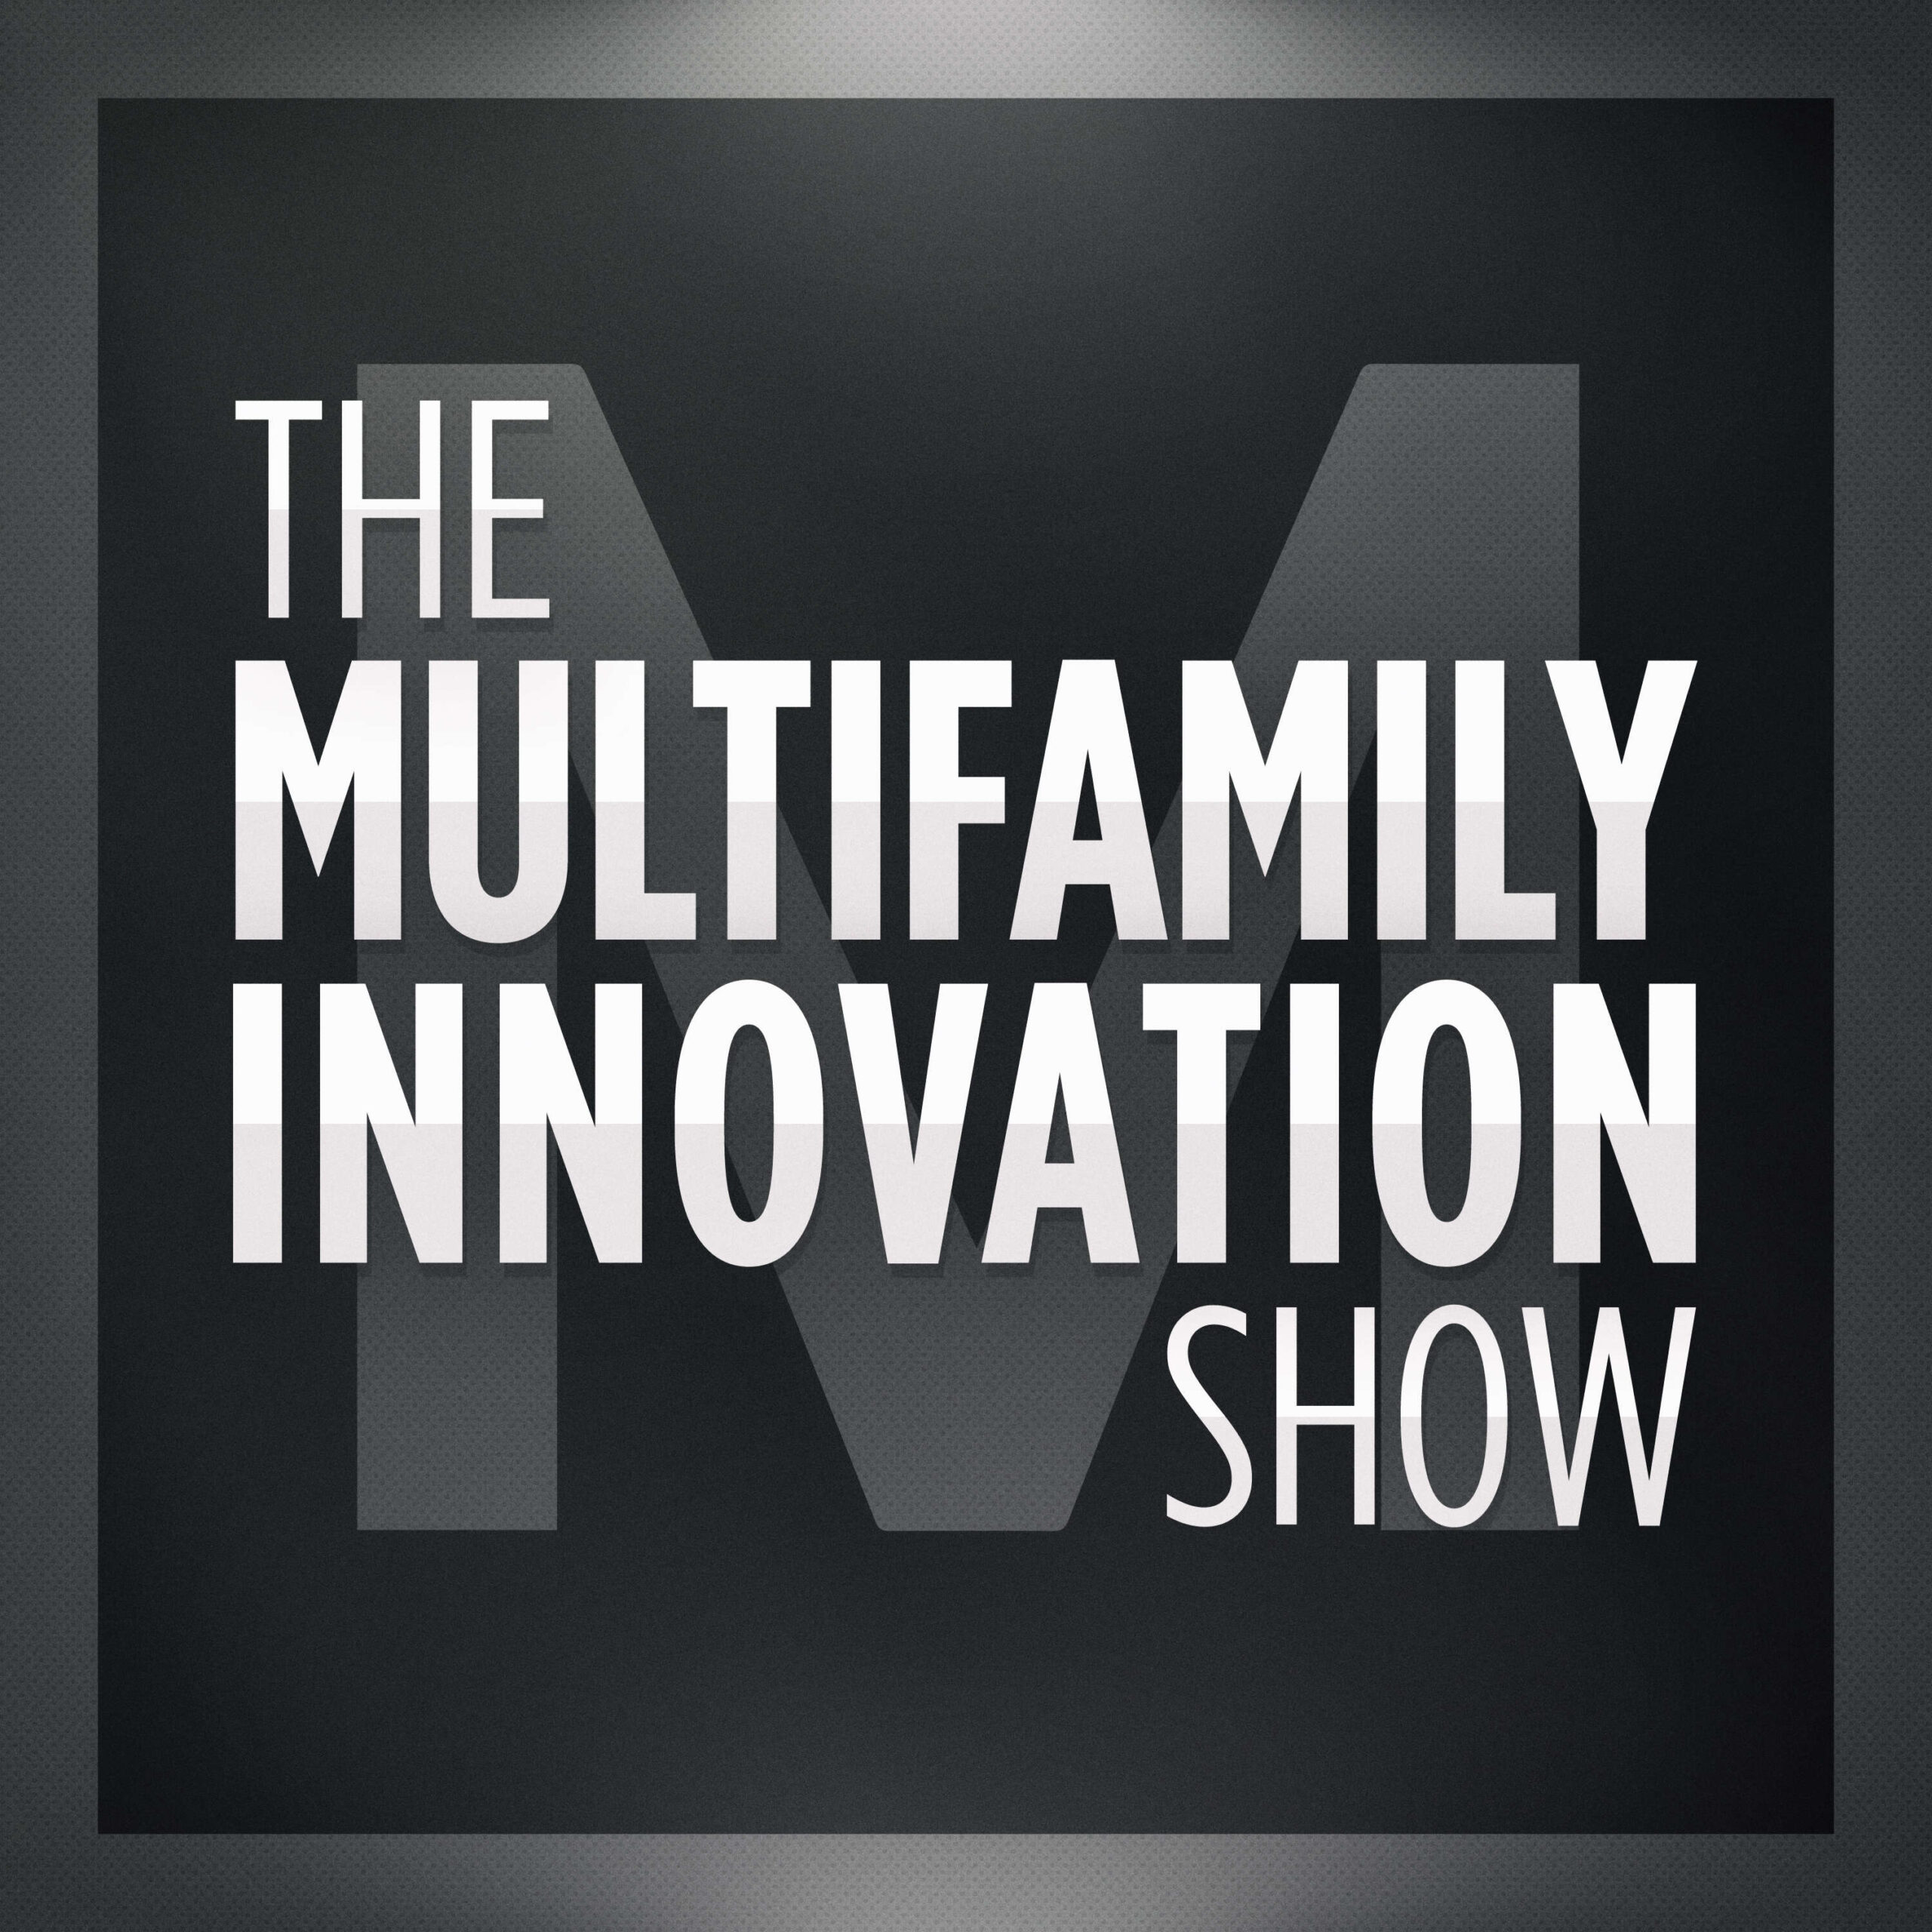 The State of Multifamily Tech